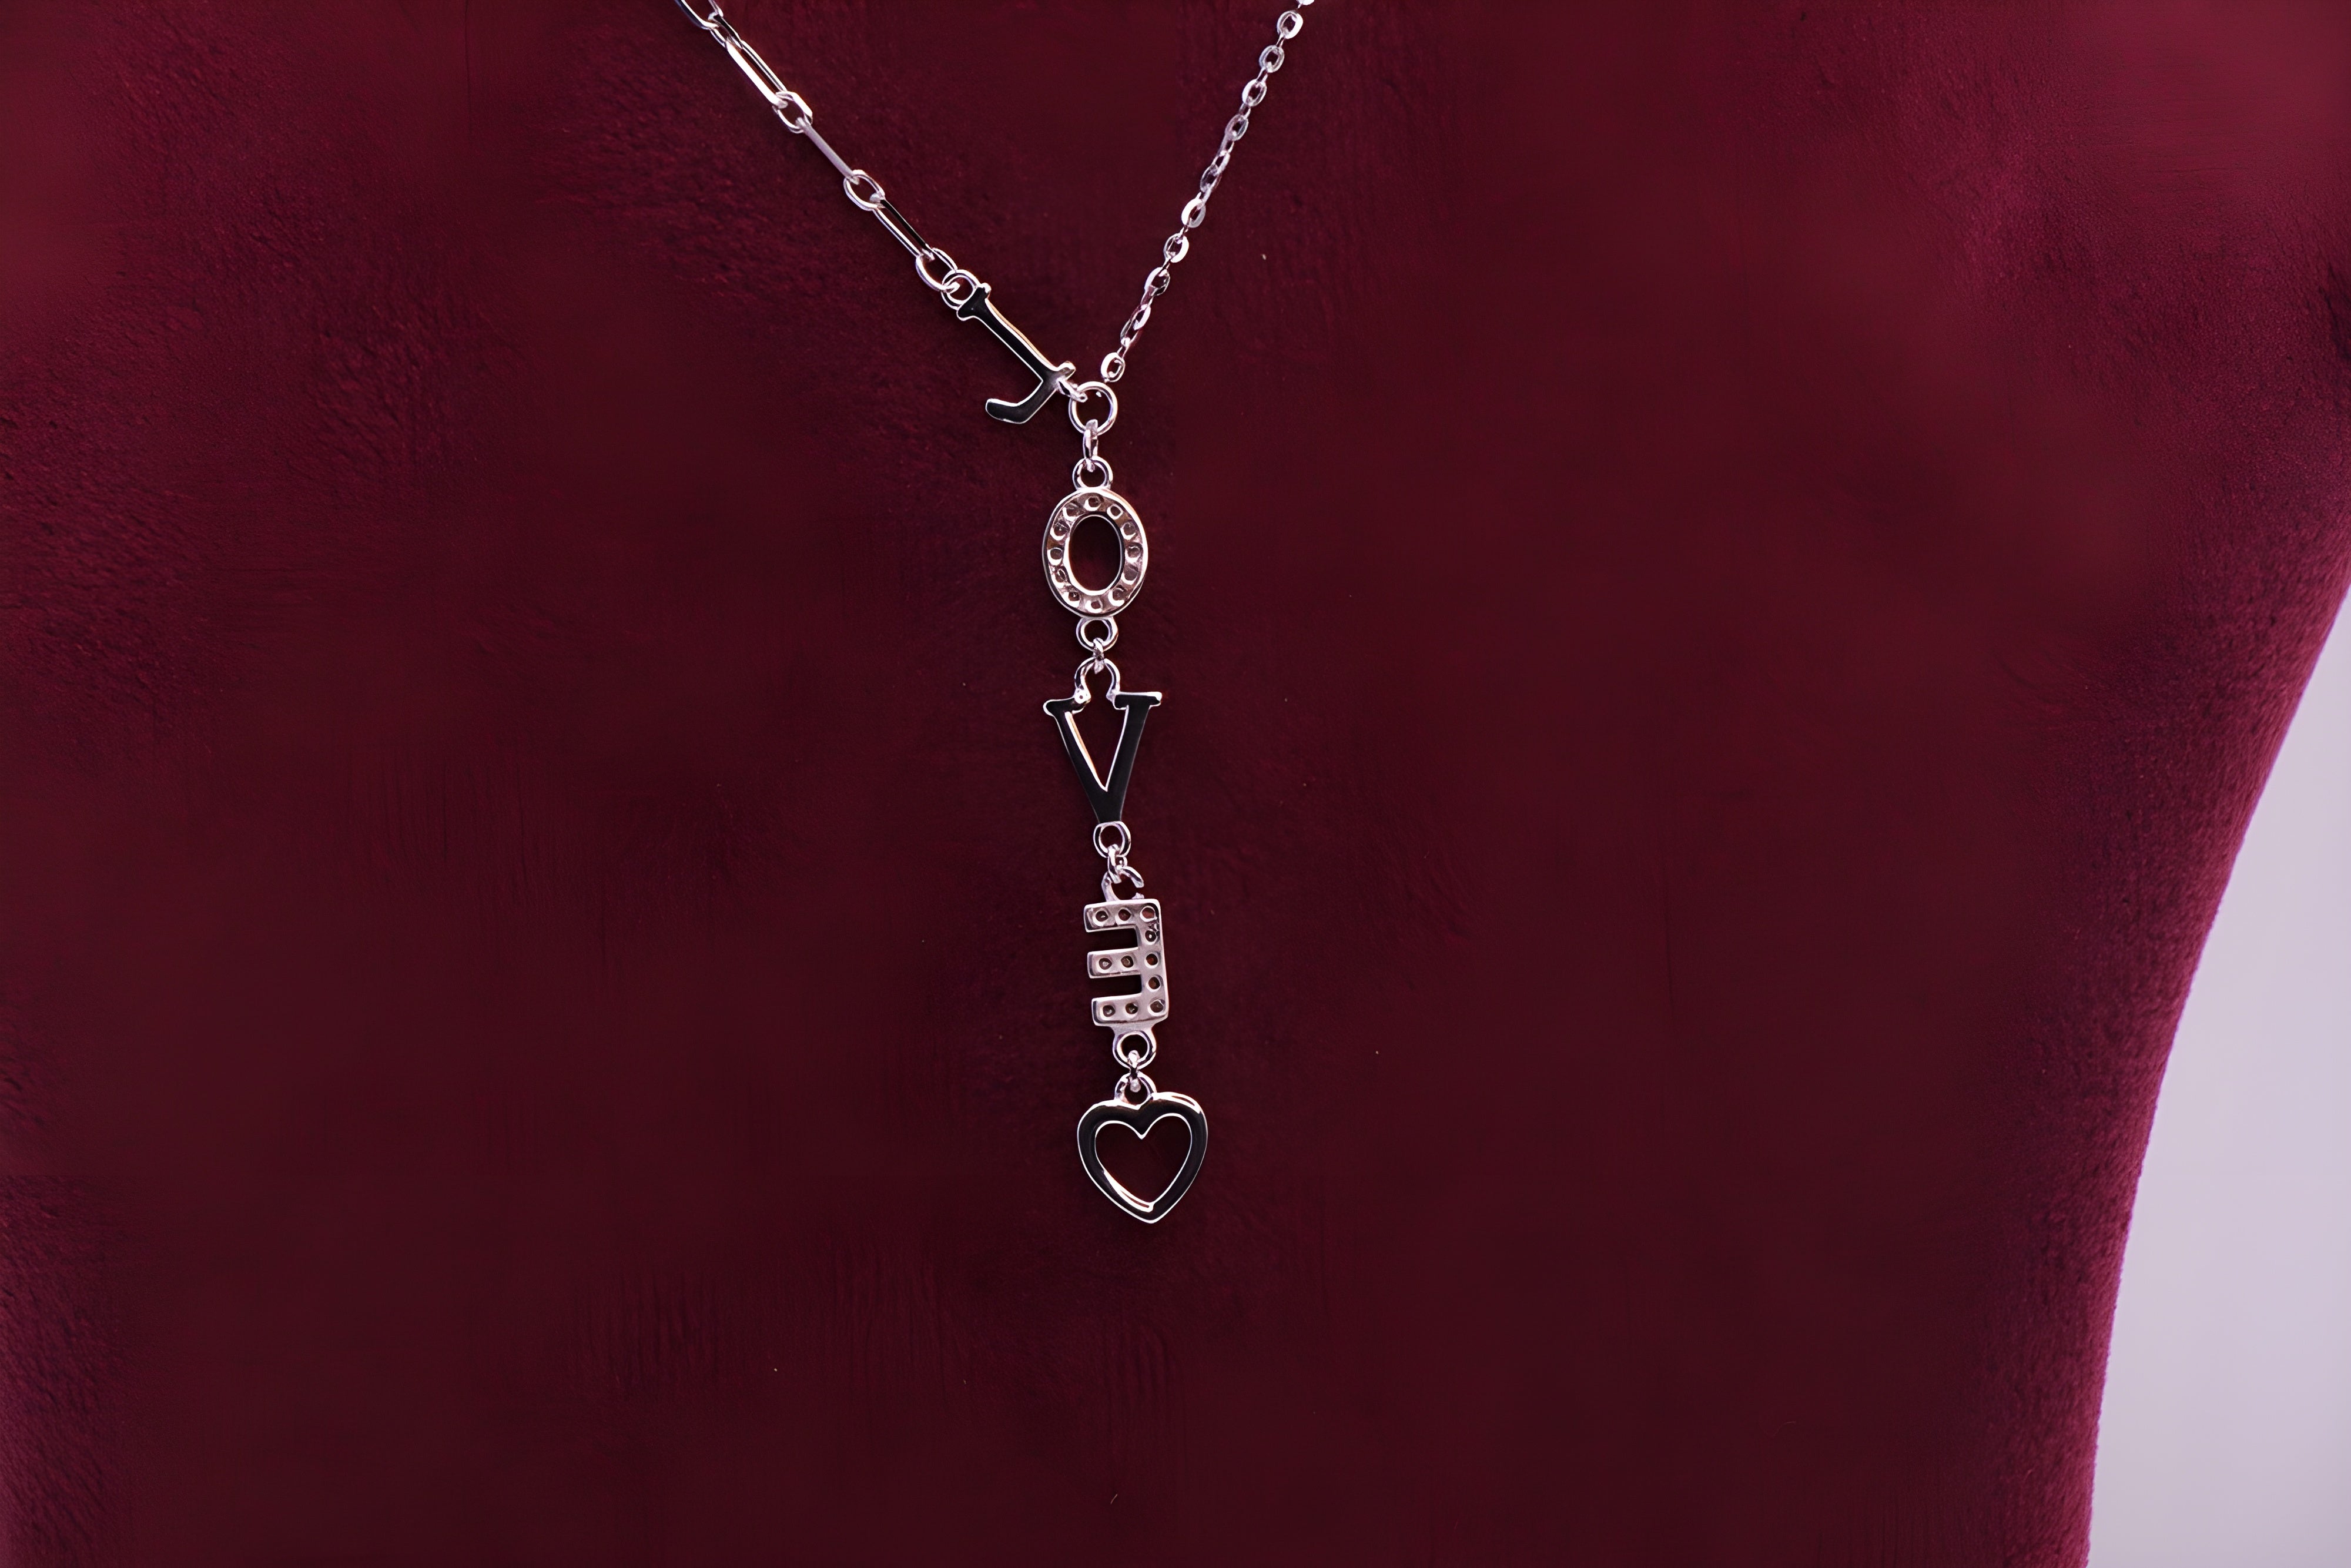 LOVE Letter Pendant in 92.5 Sterling Silver with Swarovski Crystals